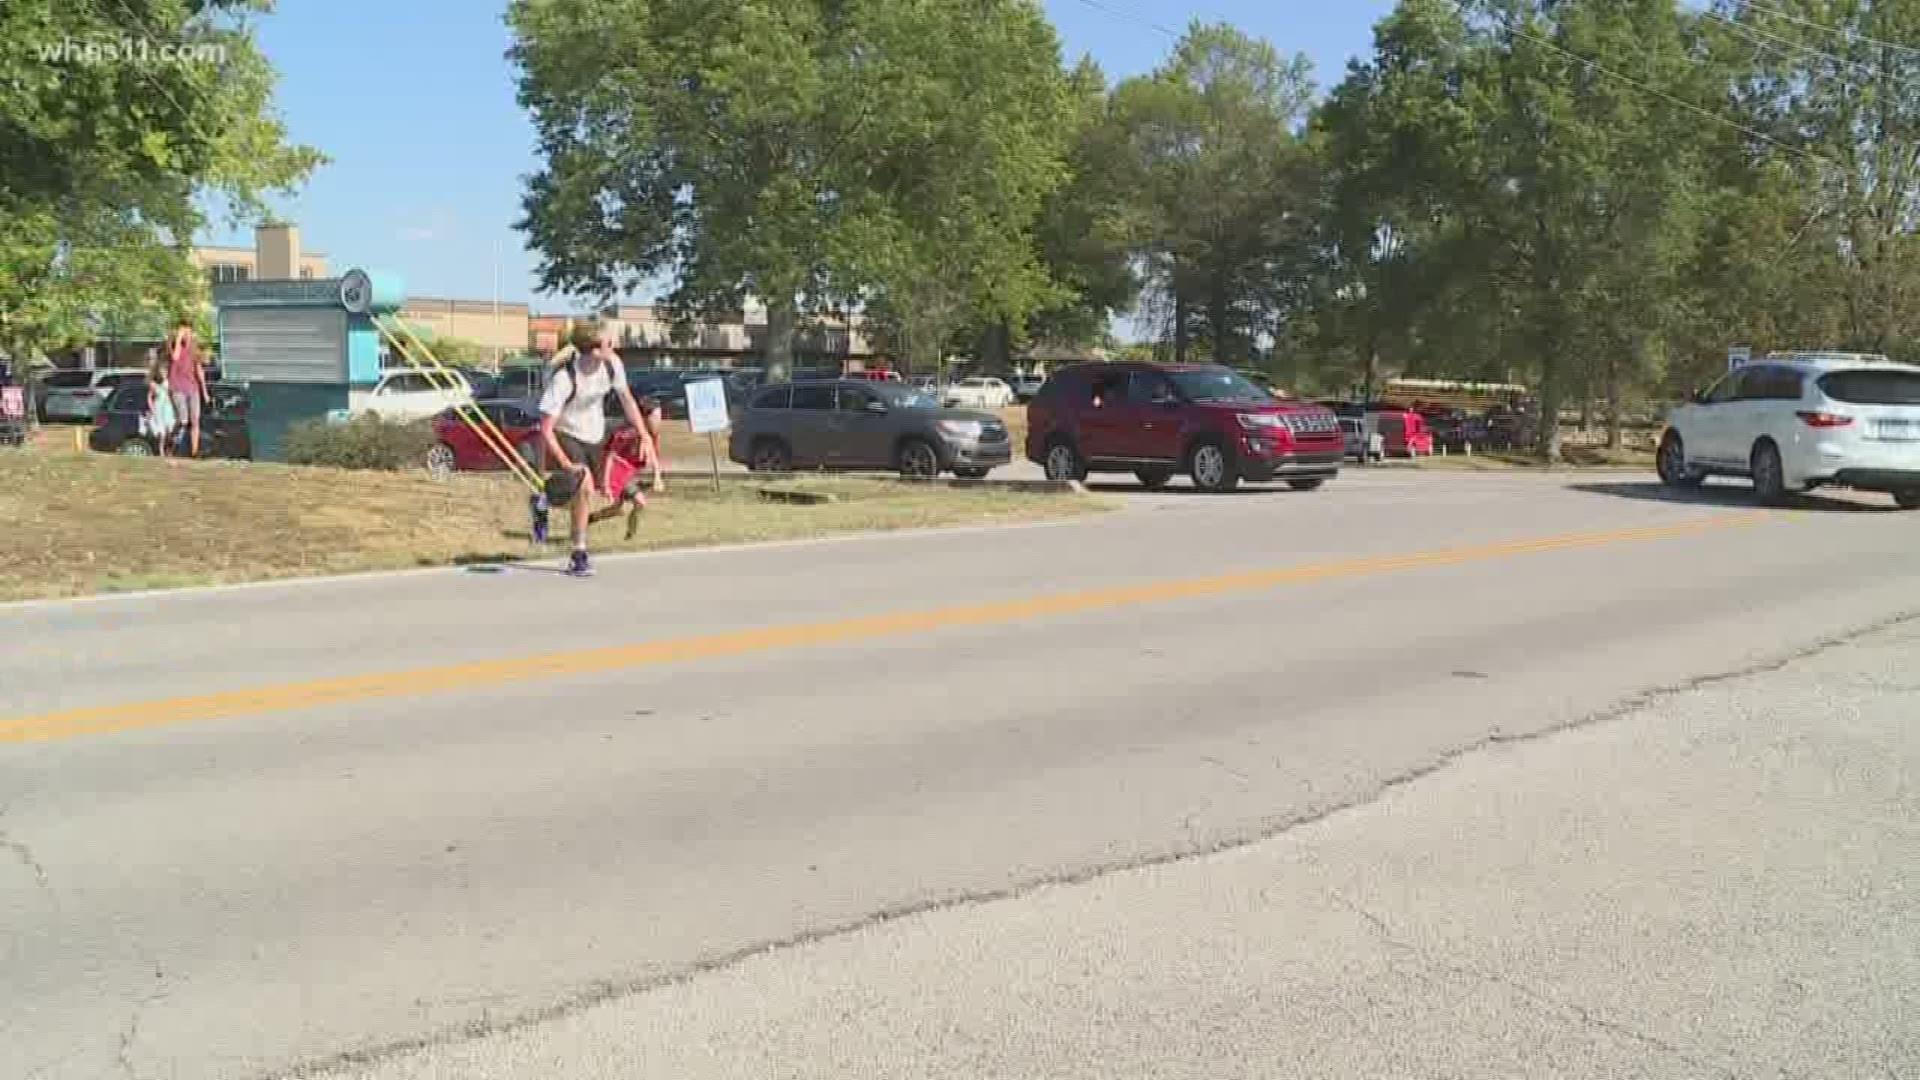 Oldham county parents express their discontent of having no crosswalk across busy street across from middle school.